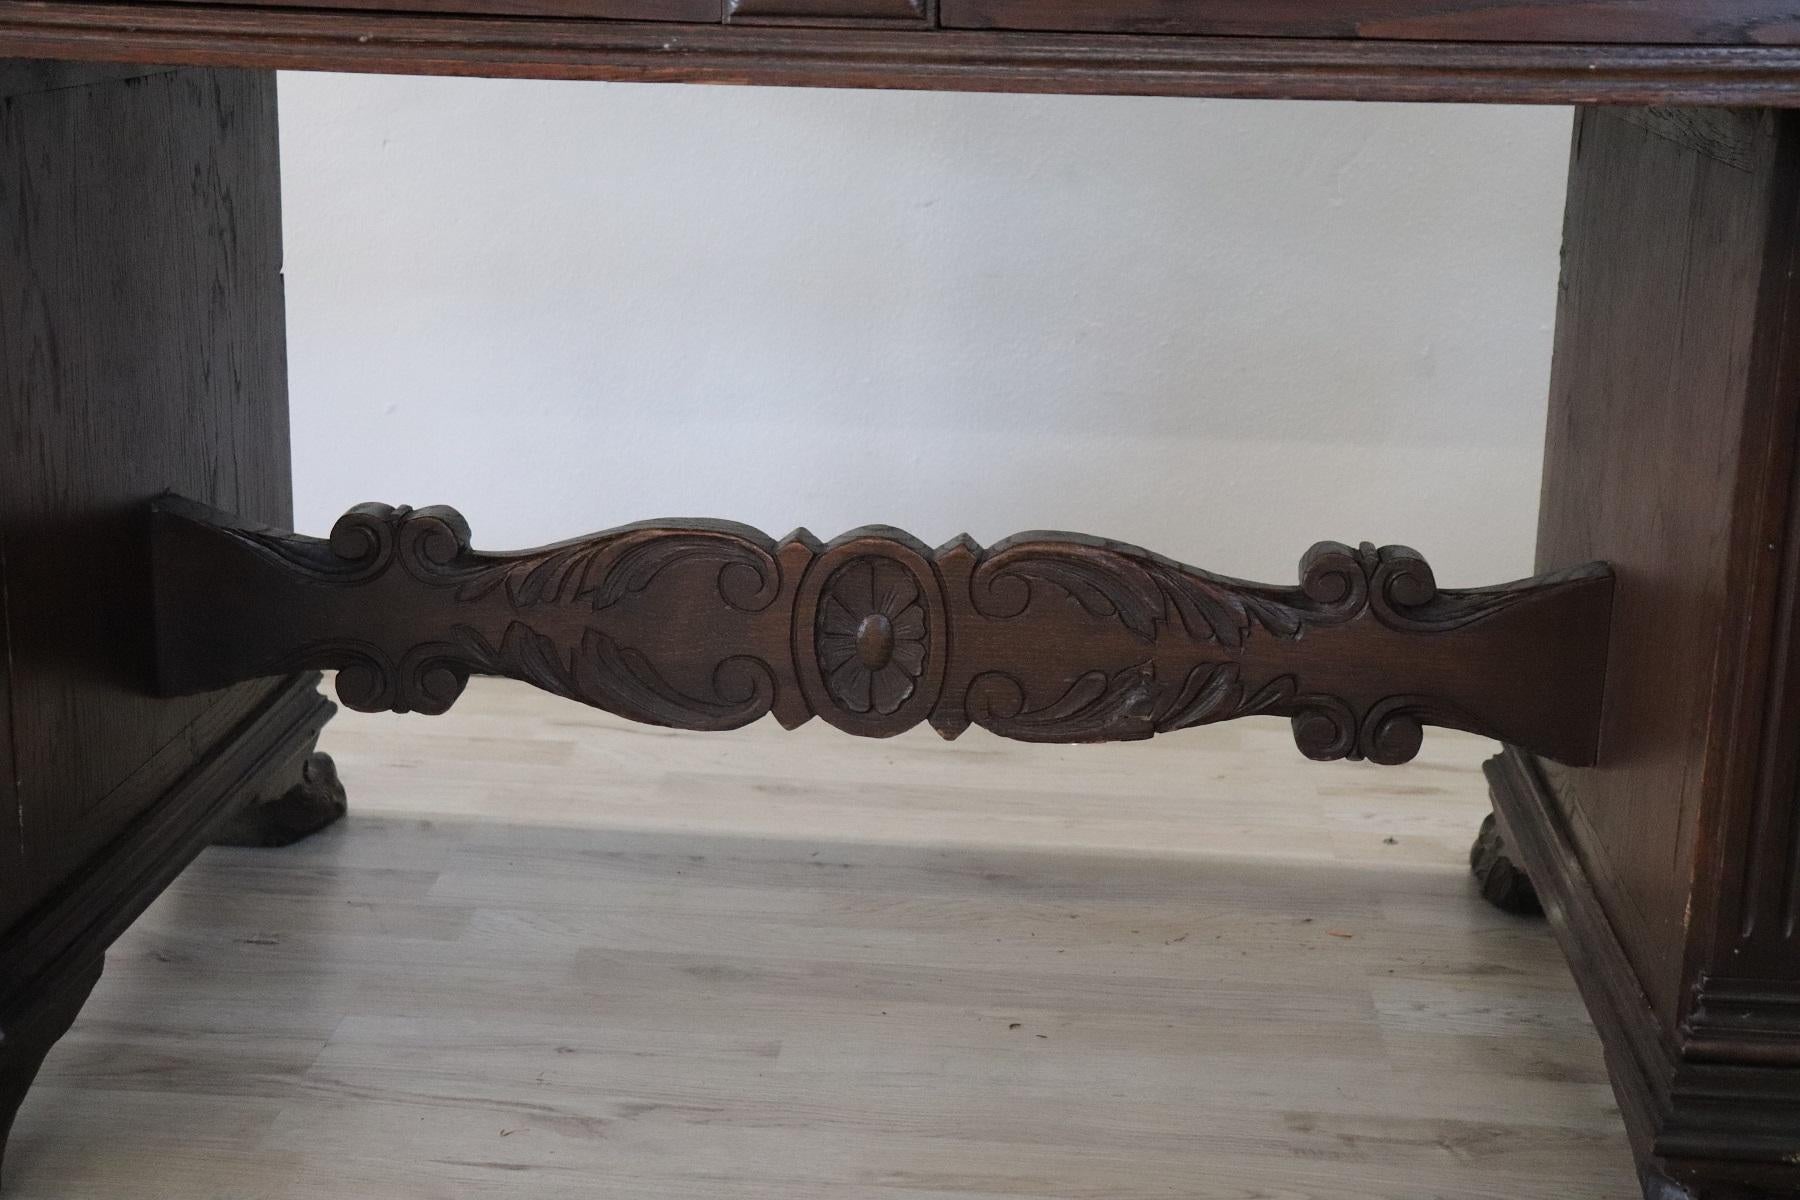 Beautiful antique rare Renaissance style writing table in carved oakwood. The sides present a refined carving decoration in wood of great artistic quality. The feet are made in the shape of a lion's paw. on the front two comfortable drawers. Medium